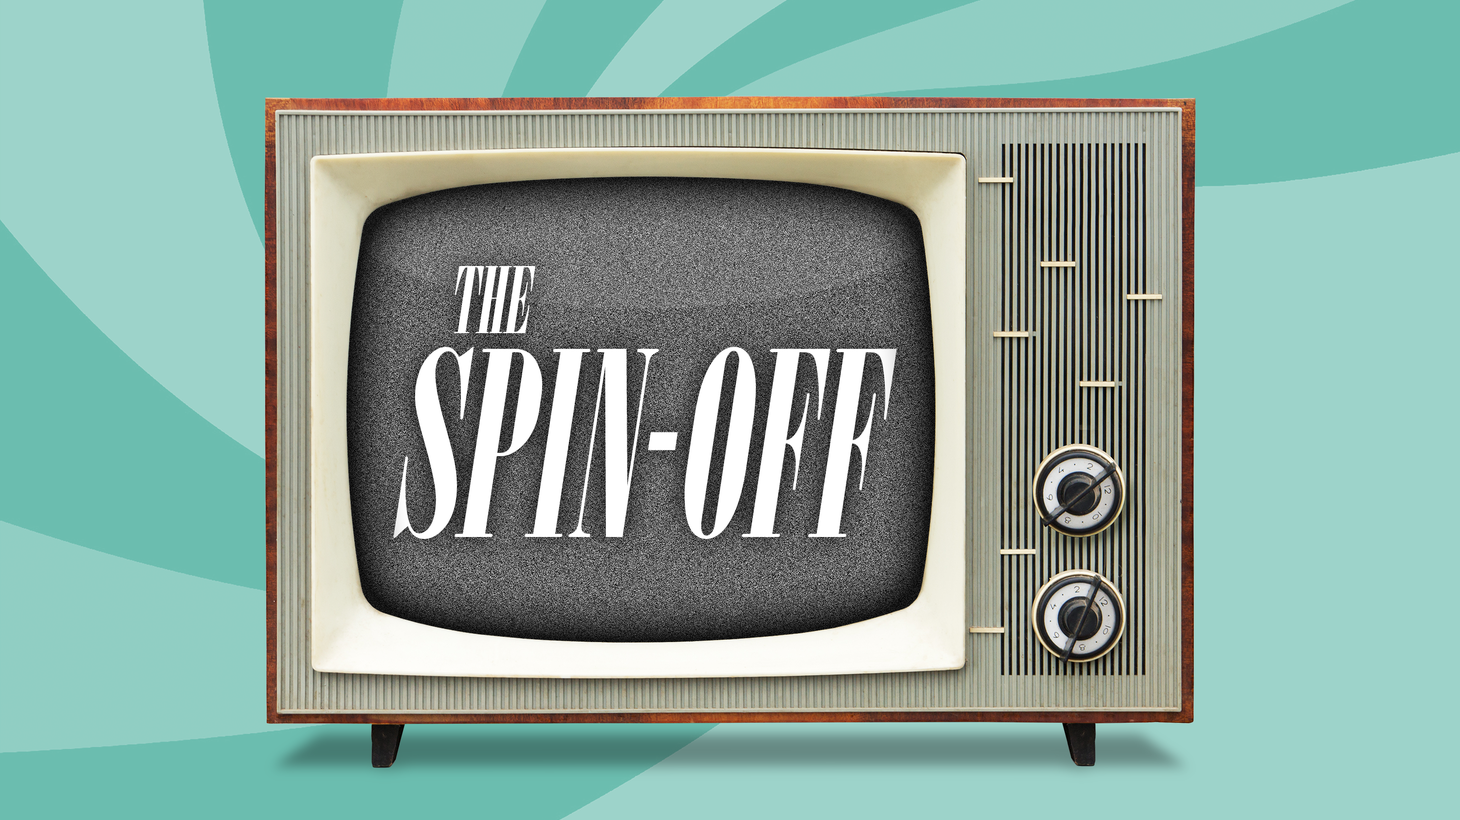 In the first episode since the election, The Spin-off crew contemplates the role TV news had in this year's presidential contest, and what TV might look like going forward. Plus, what's up with NFL ratings this year, and Dan's take on the newest Gilmore Girls revival on Netflix.